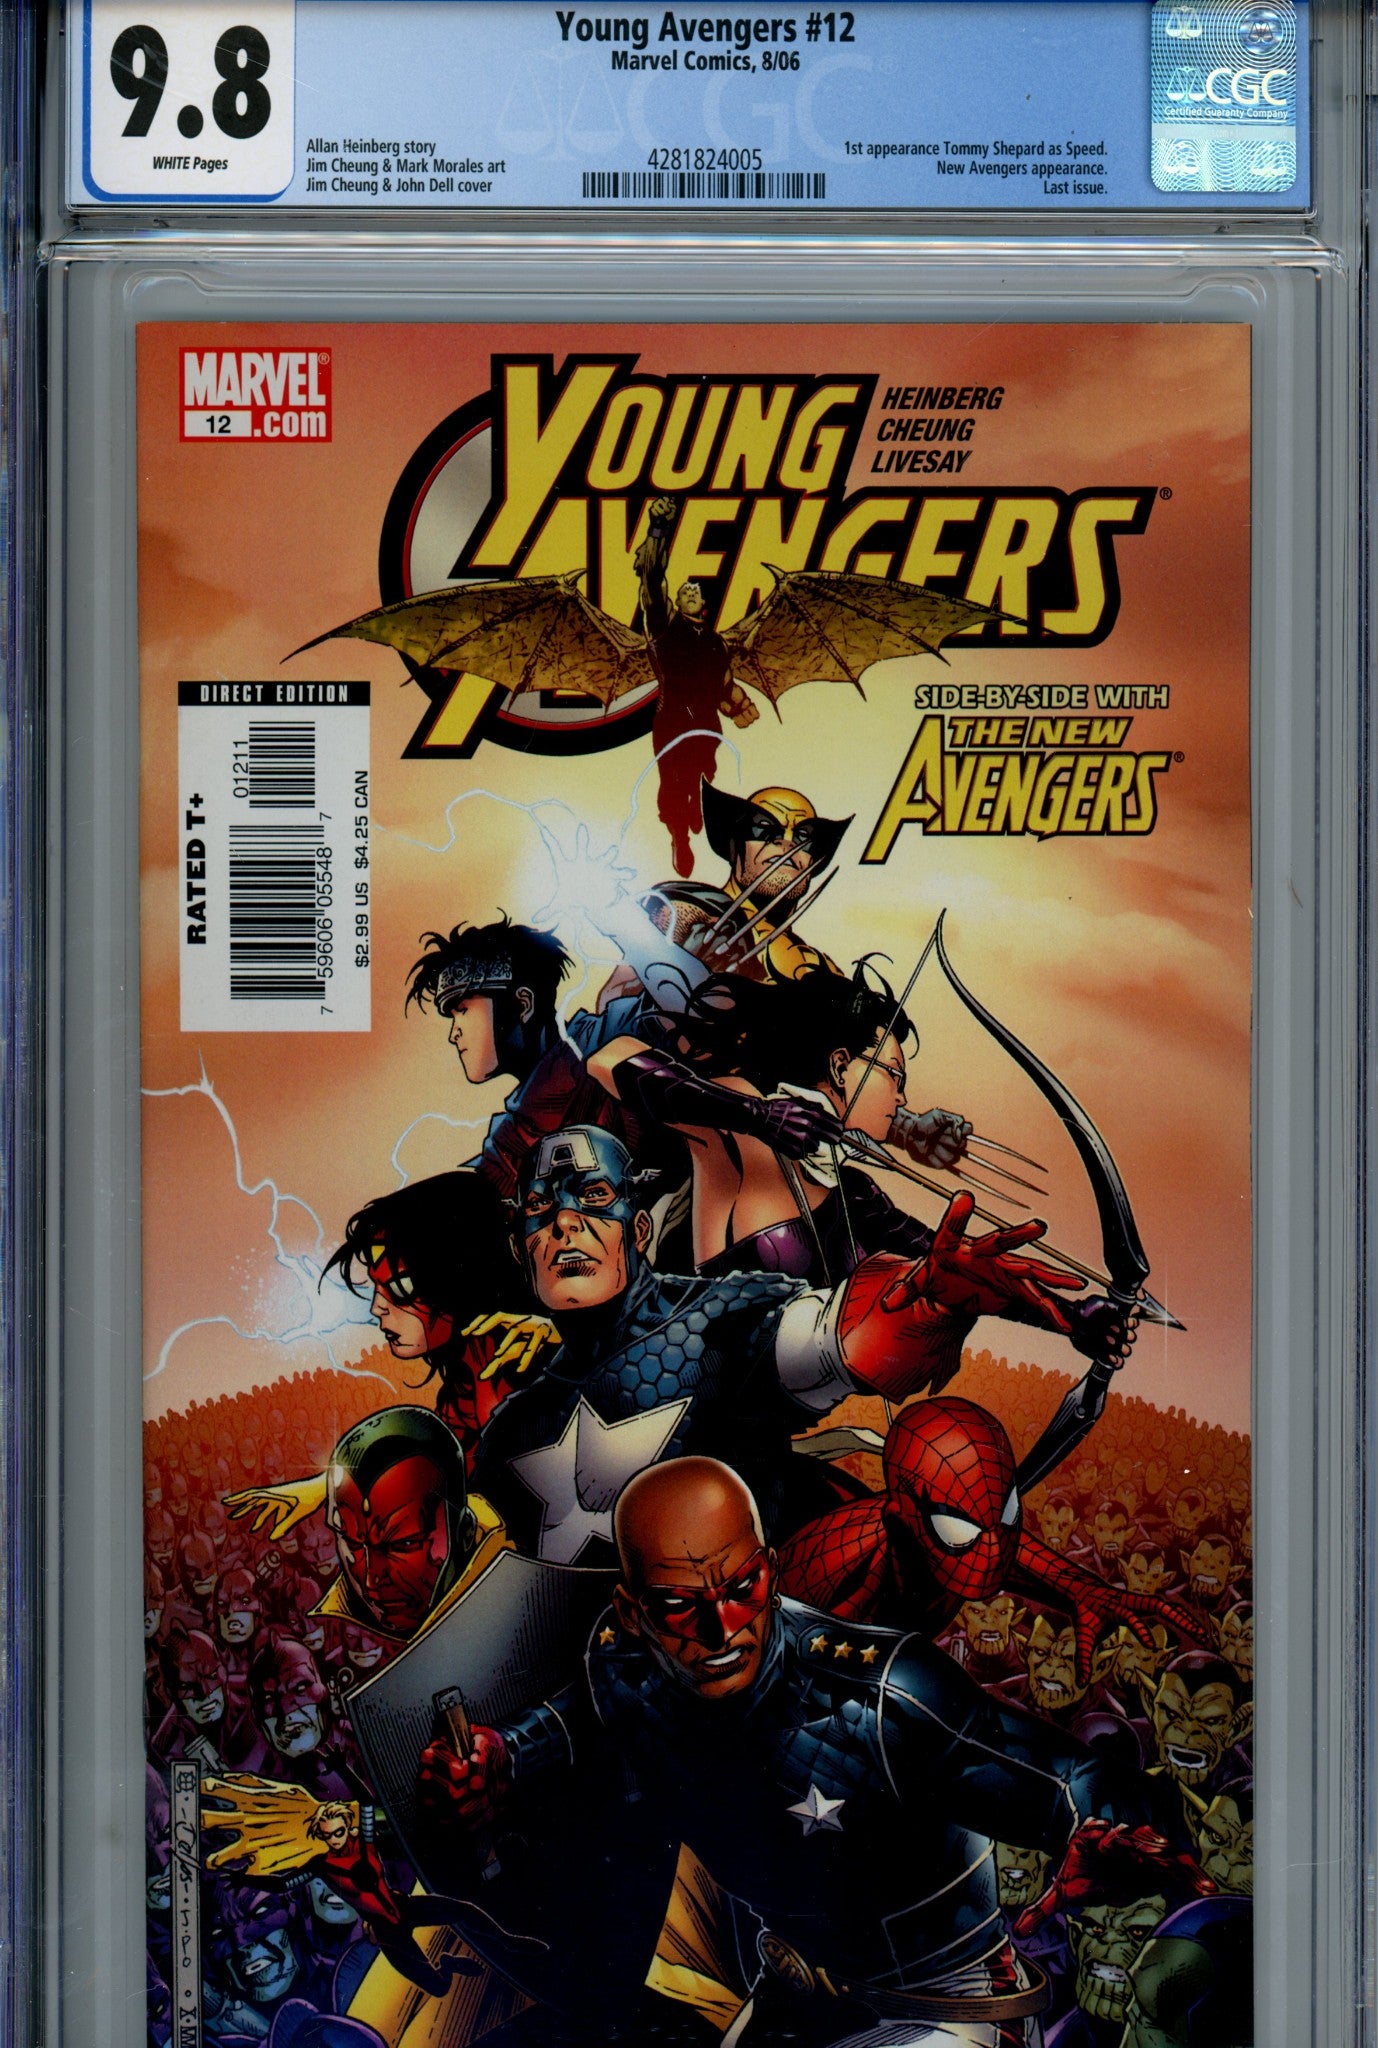 Young Avengers Vol 1 12 CGC 9.8 (2006)